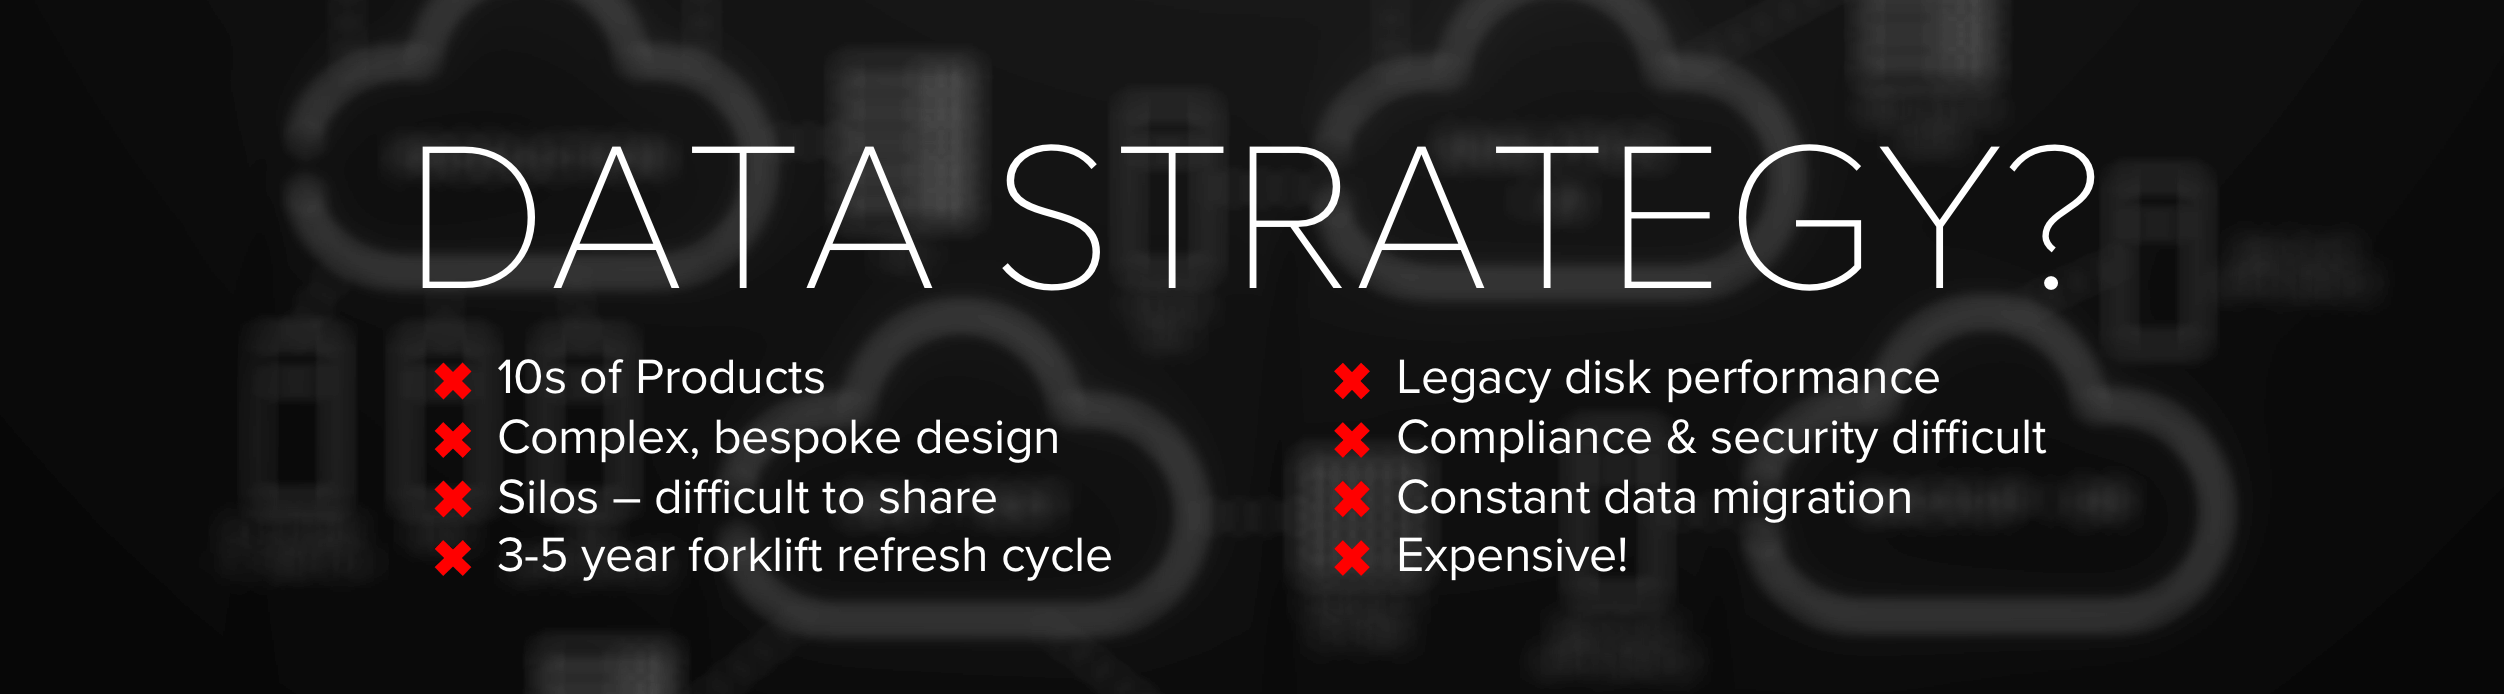 Data Strategy for Data Centric Organizations